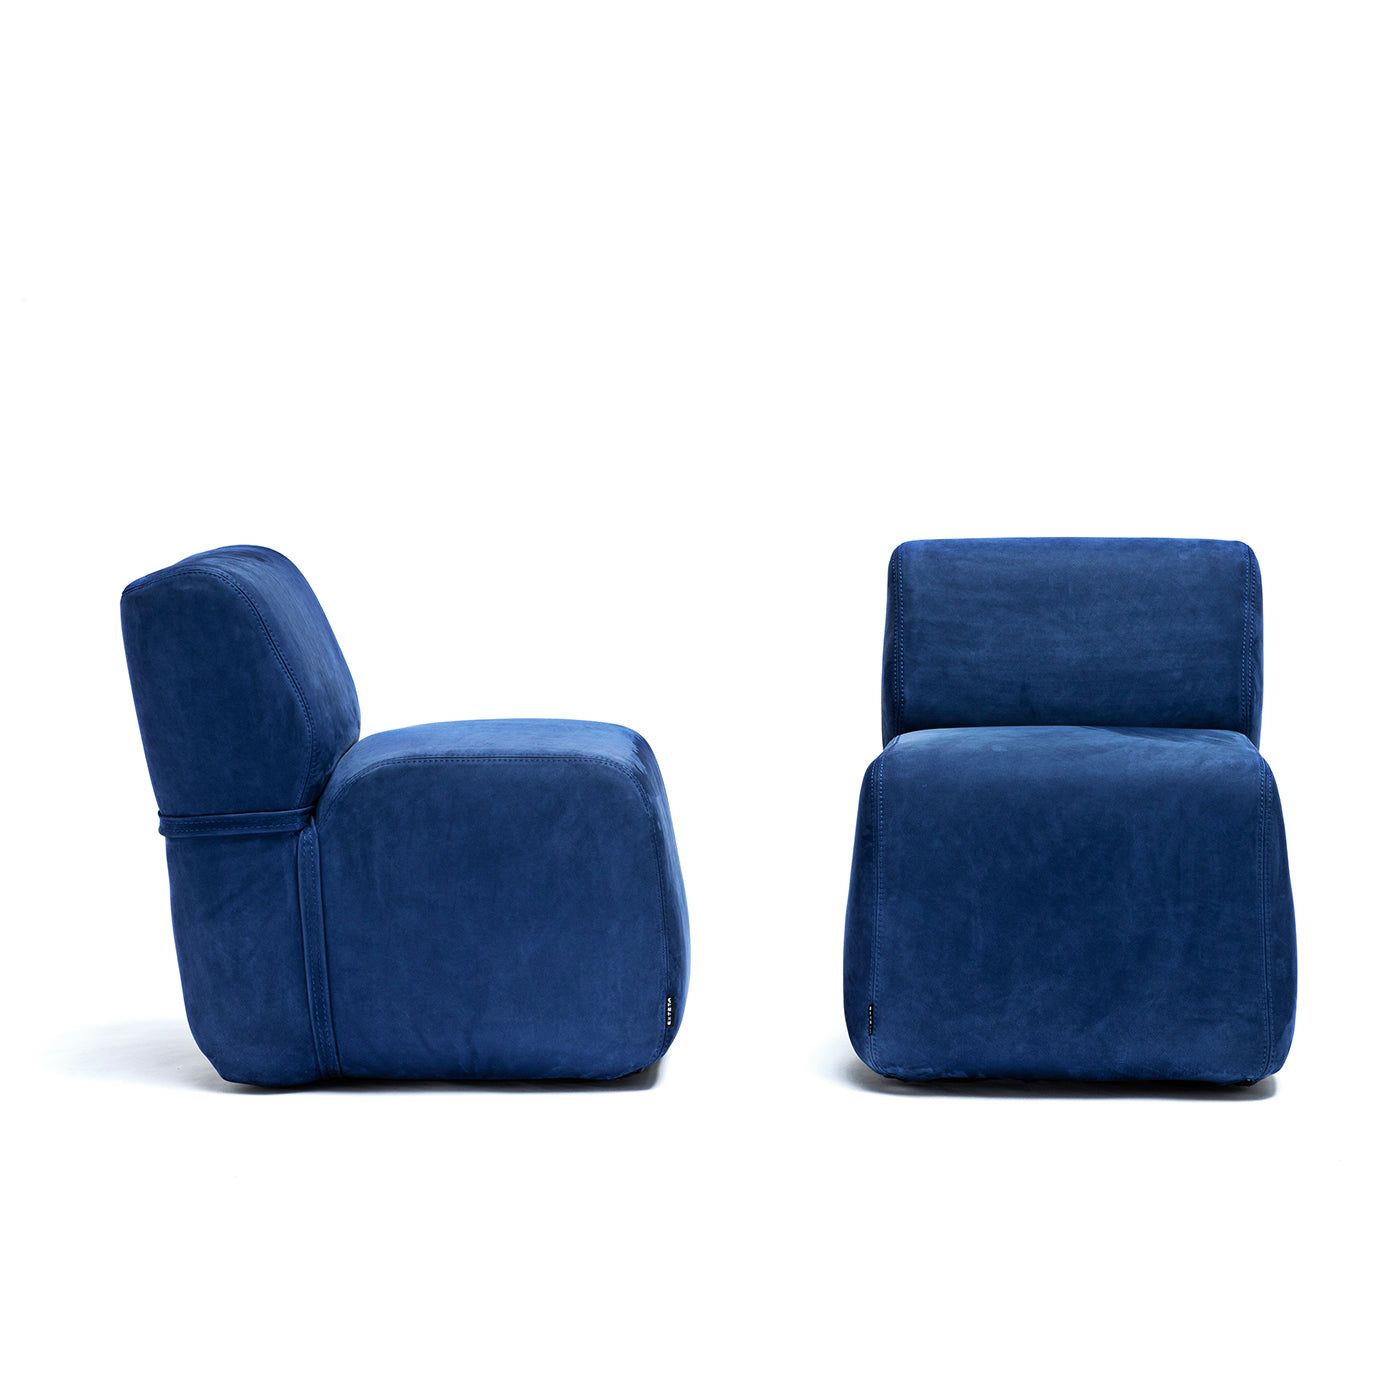 Soft Small Blue Lounge Chair - Alternative view 1